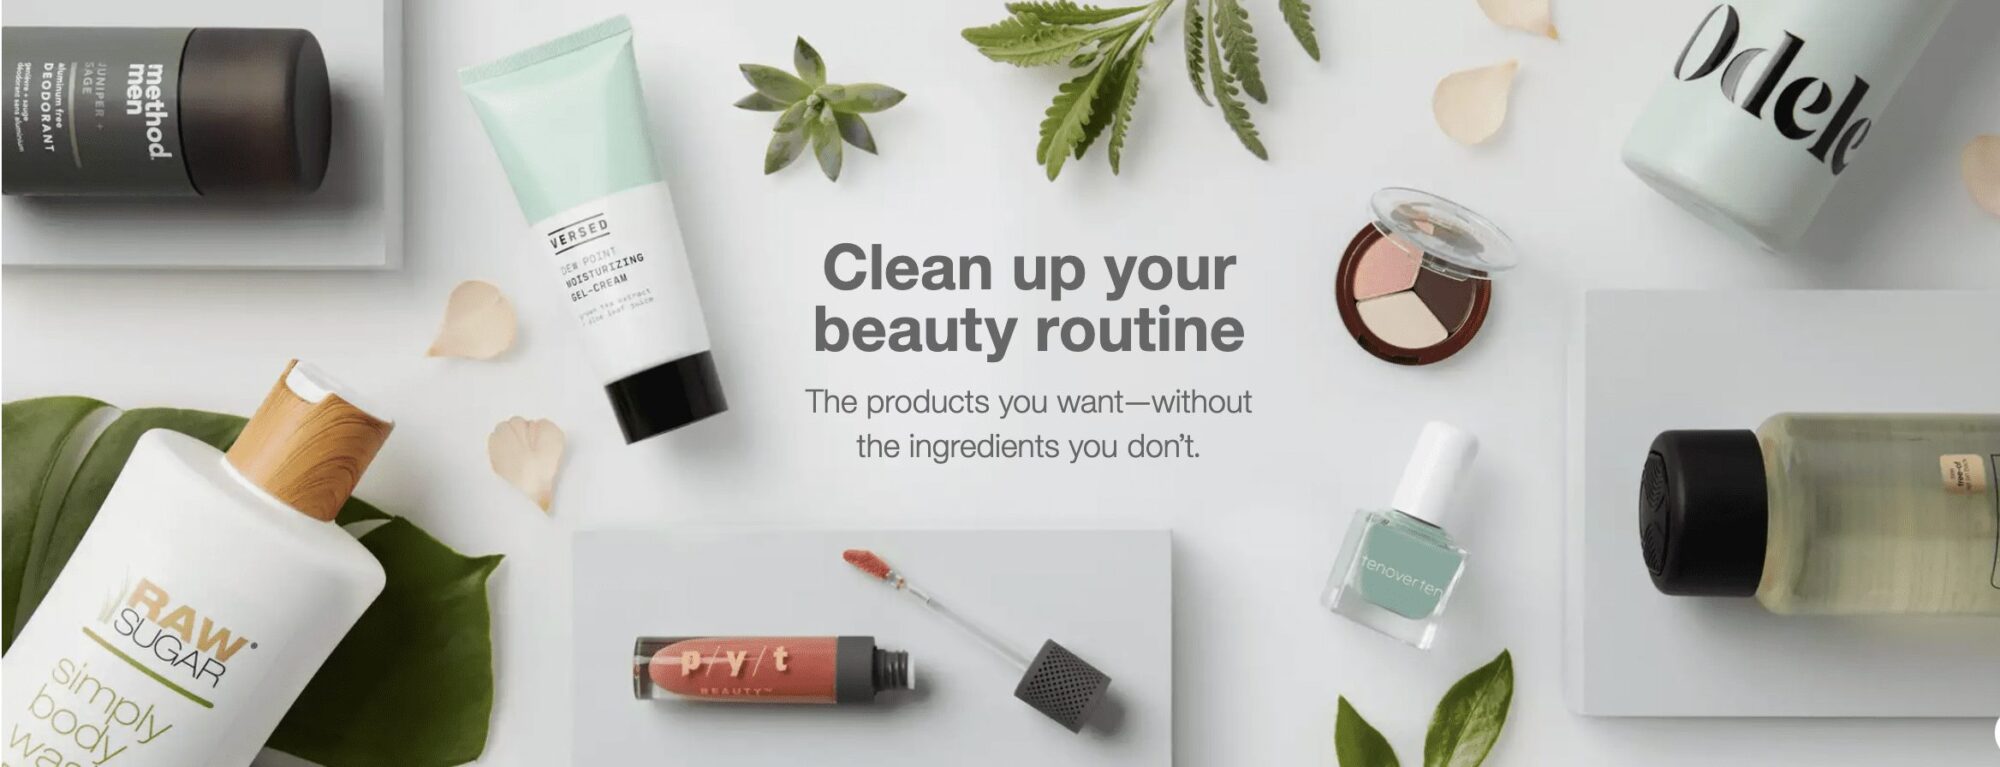 How to shop for clean products from Target